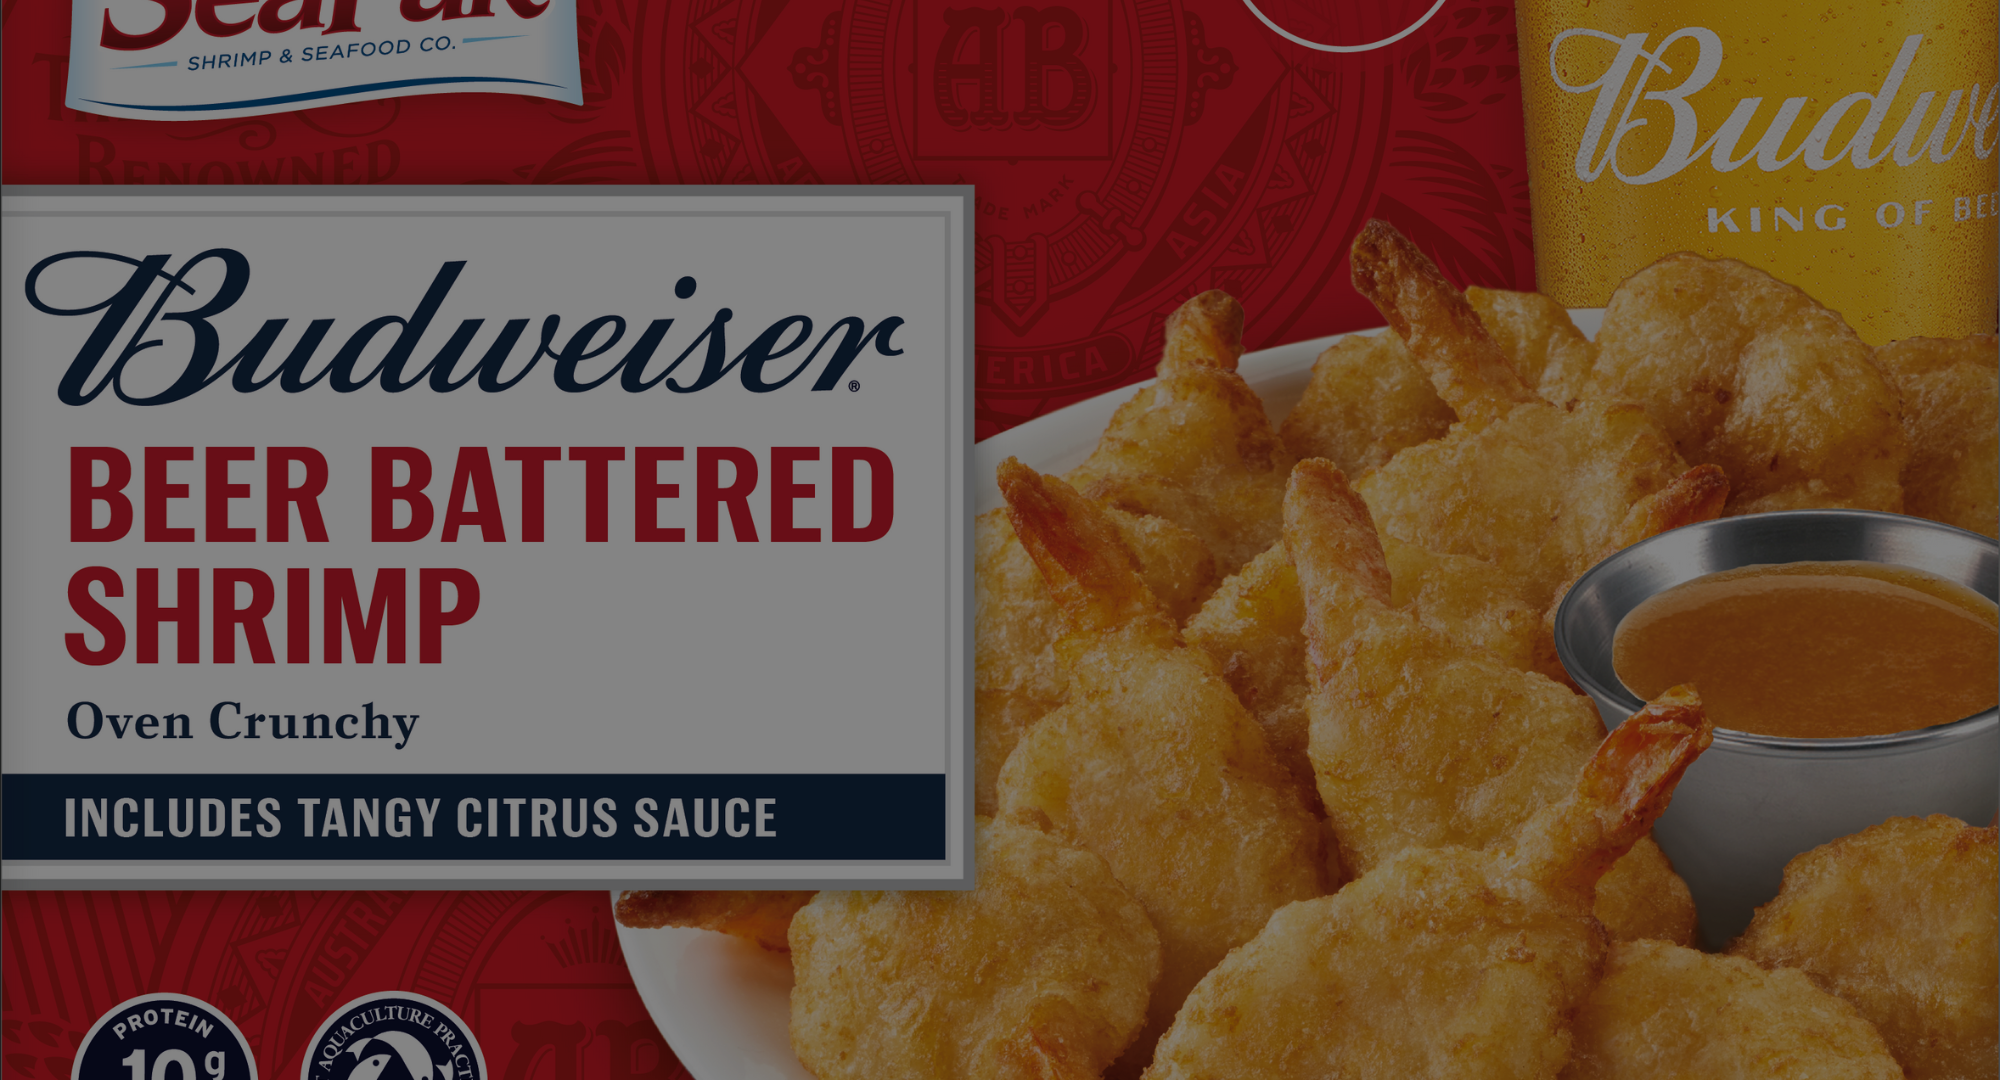 SeaPak Launches New Budweiser Beer Battered Seafood Line